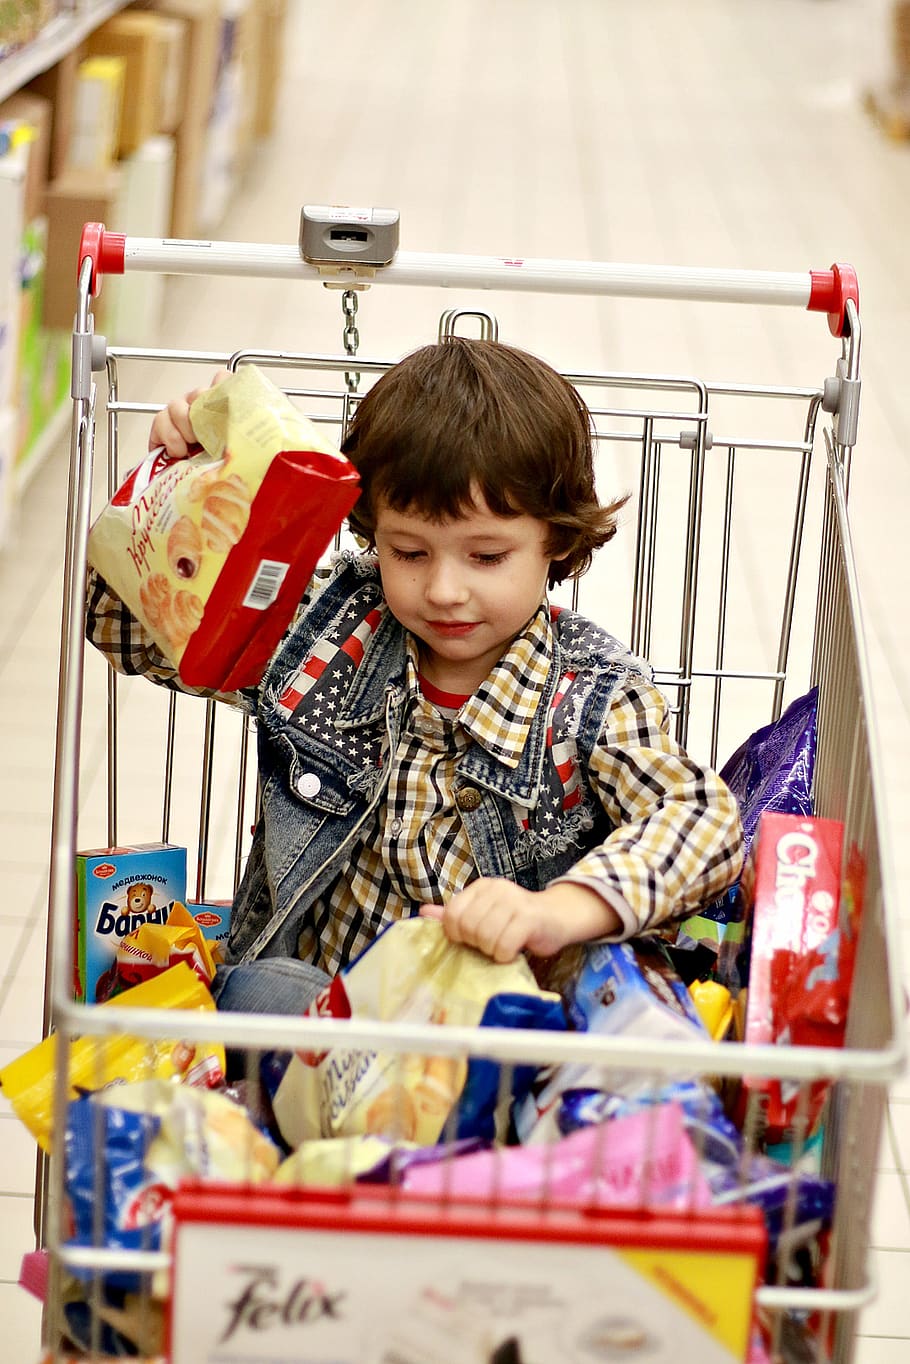 shop, products, purchase, the boy in the basket, the boy in the cart, sweets, baby products, candy, chocolate, chocolates